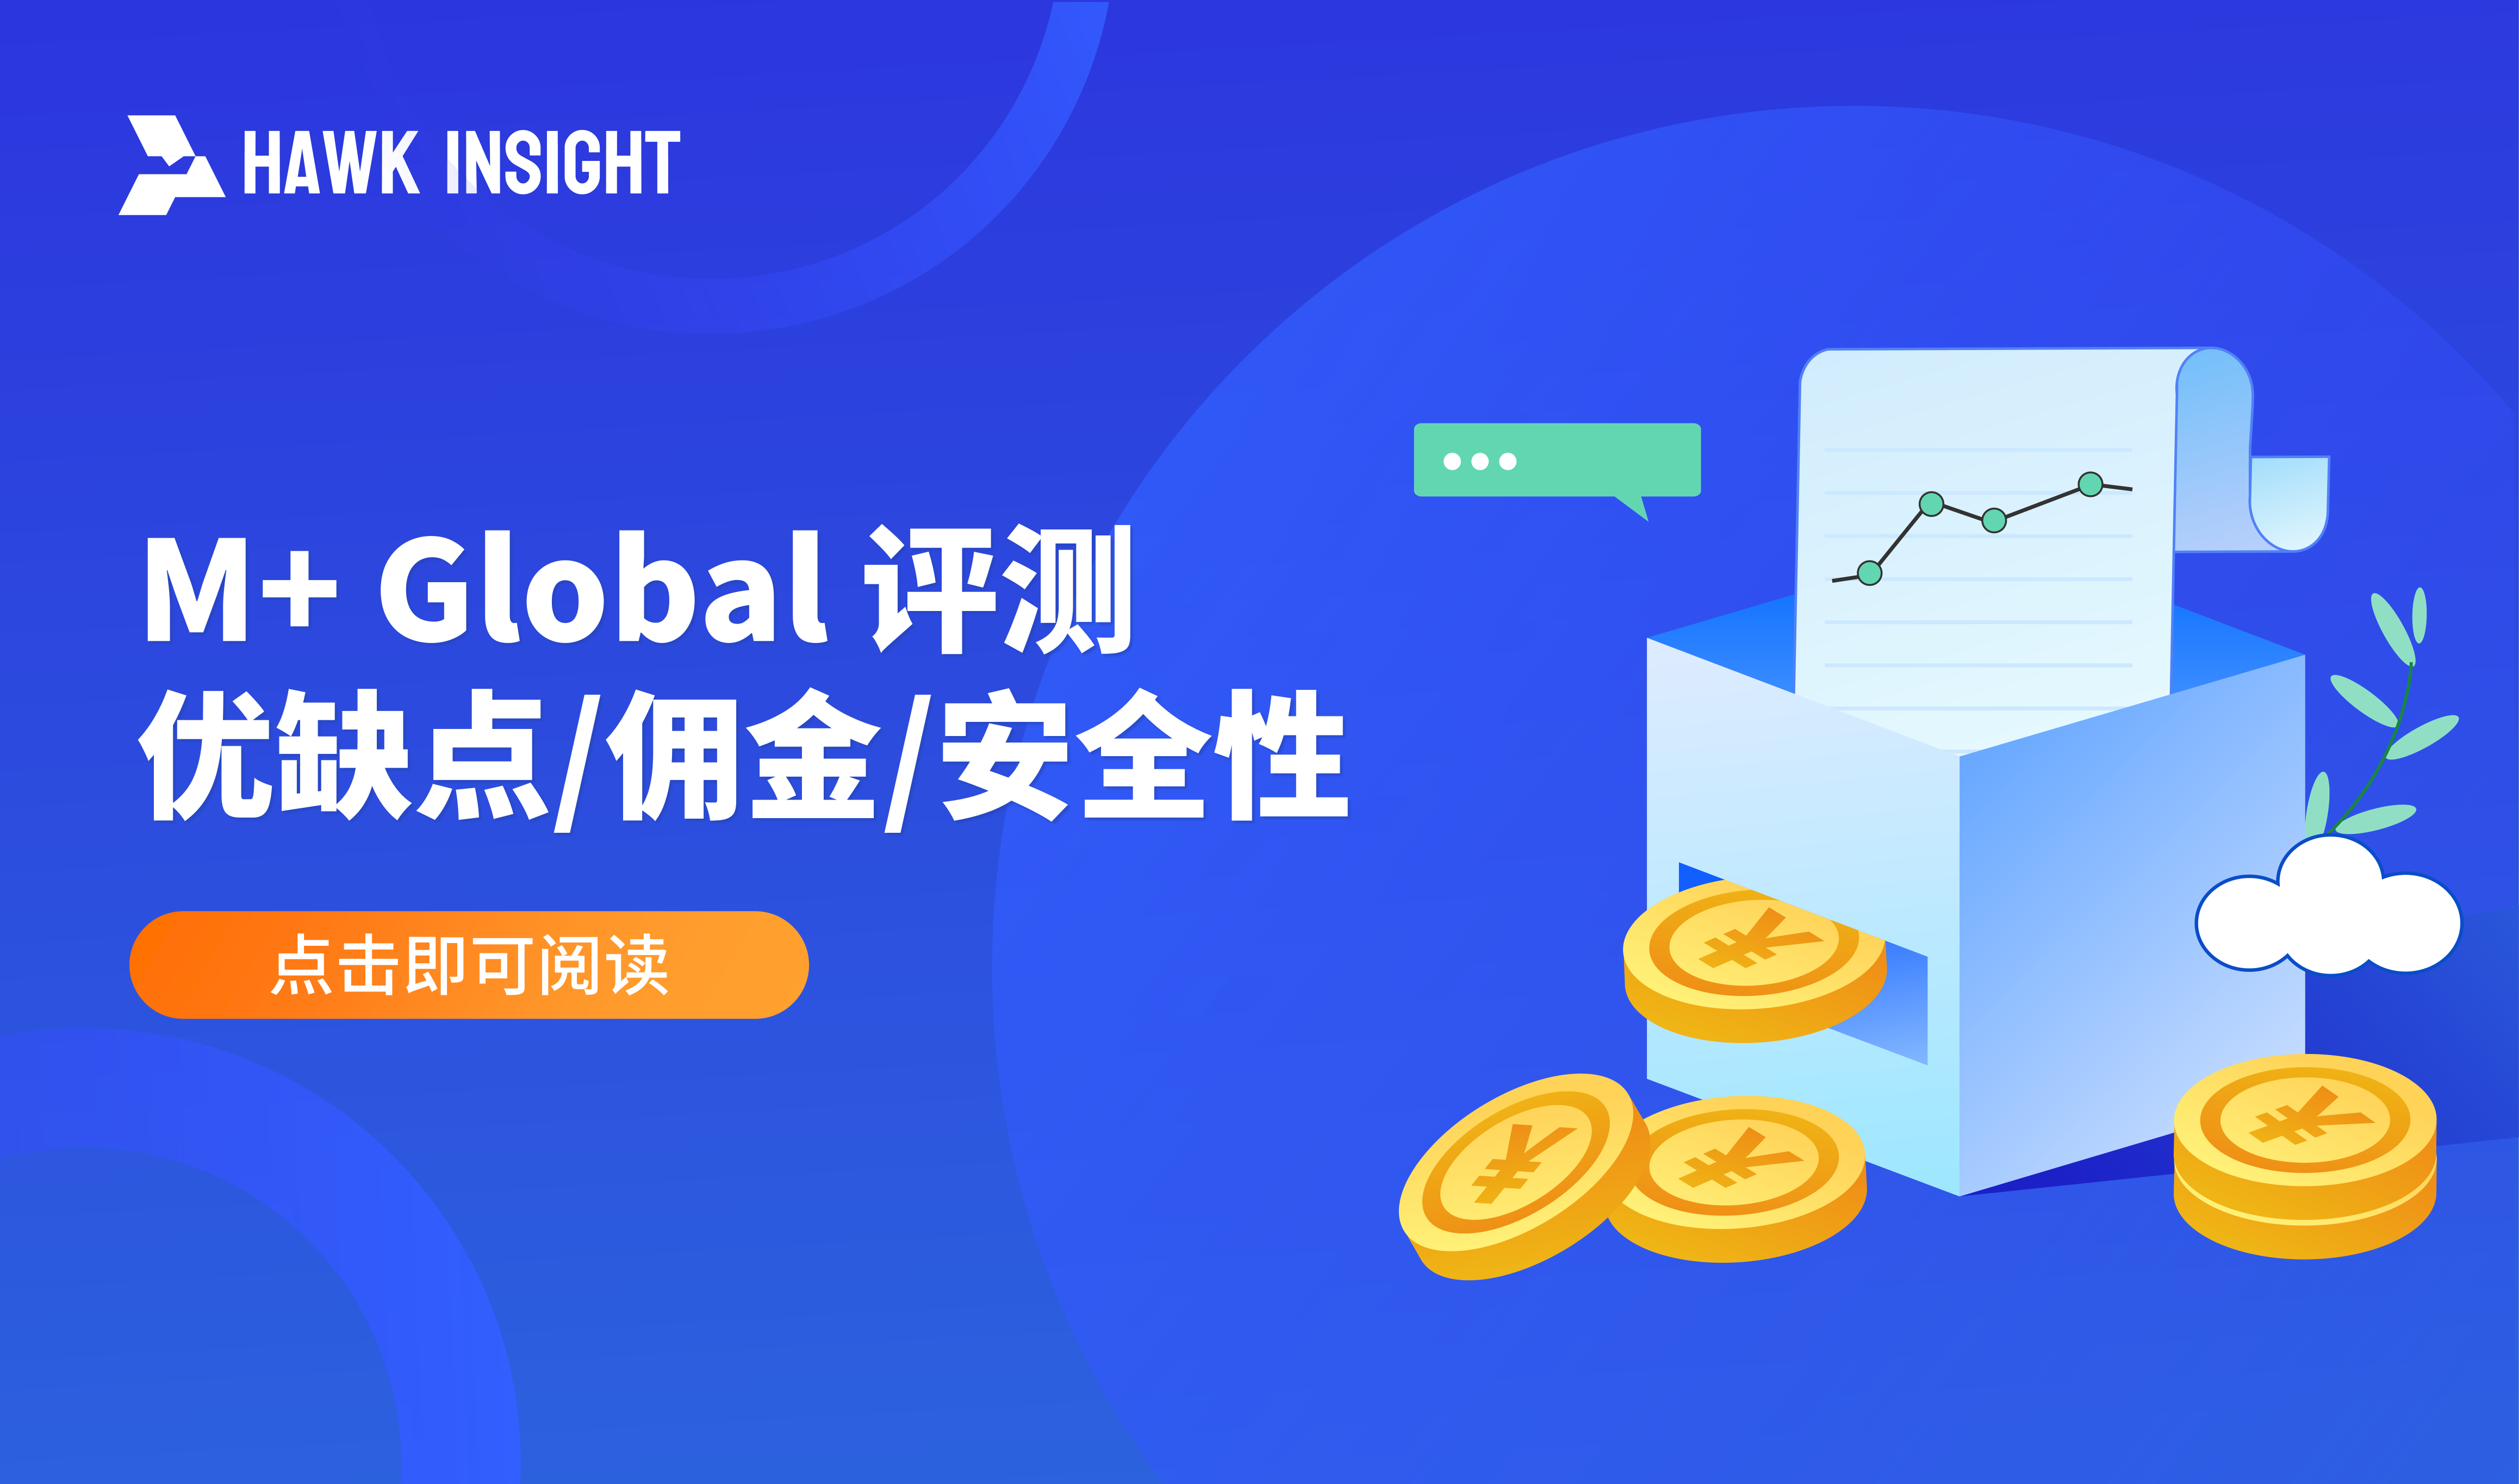 M + Global Review: Advantages and Disadvantages / Commission / Security